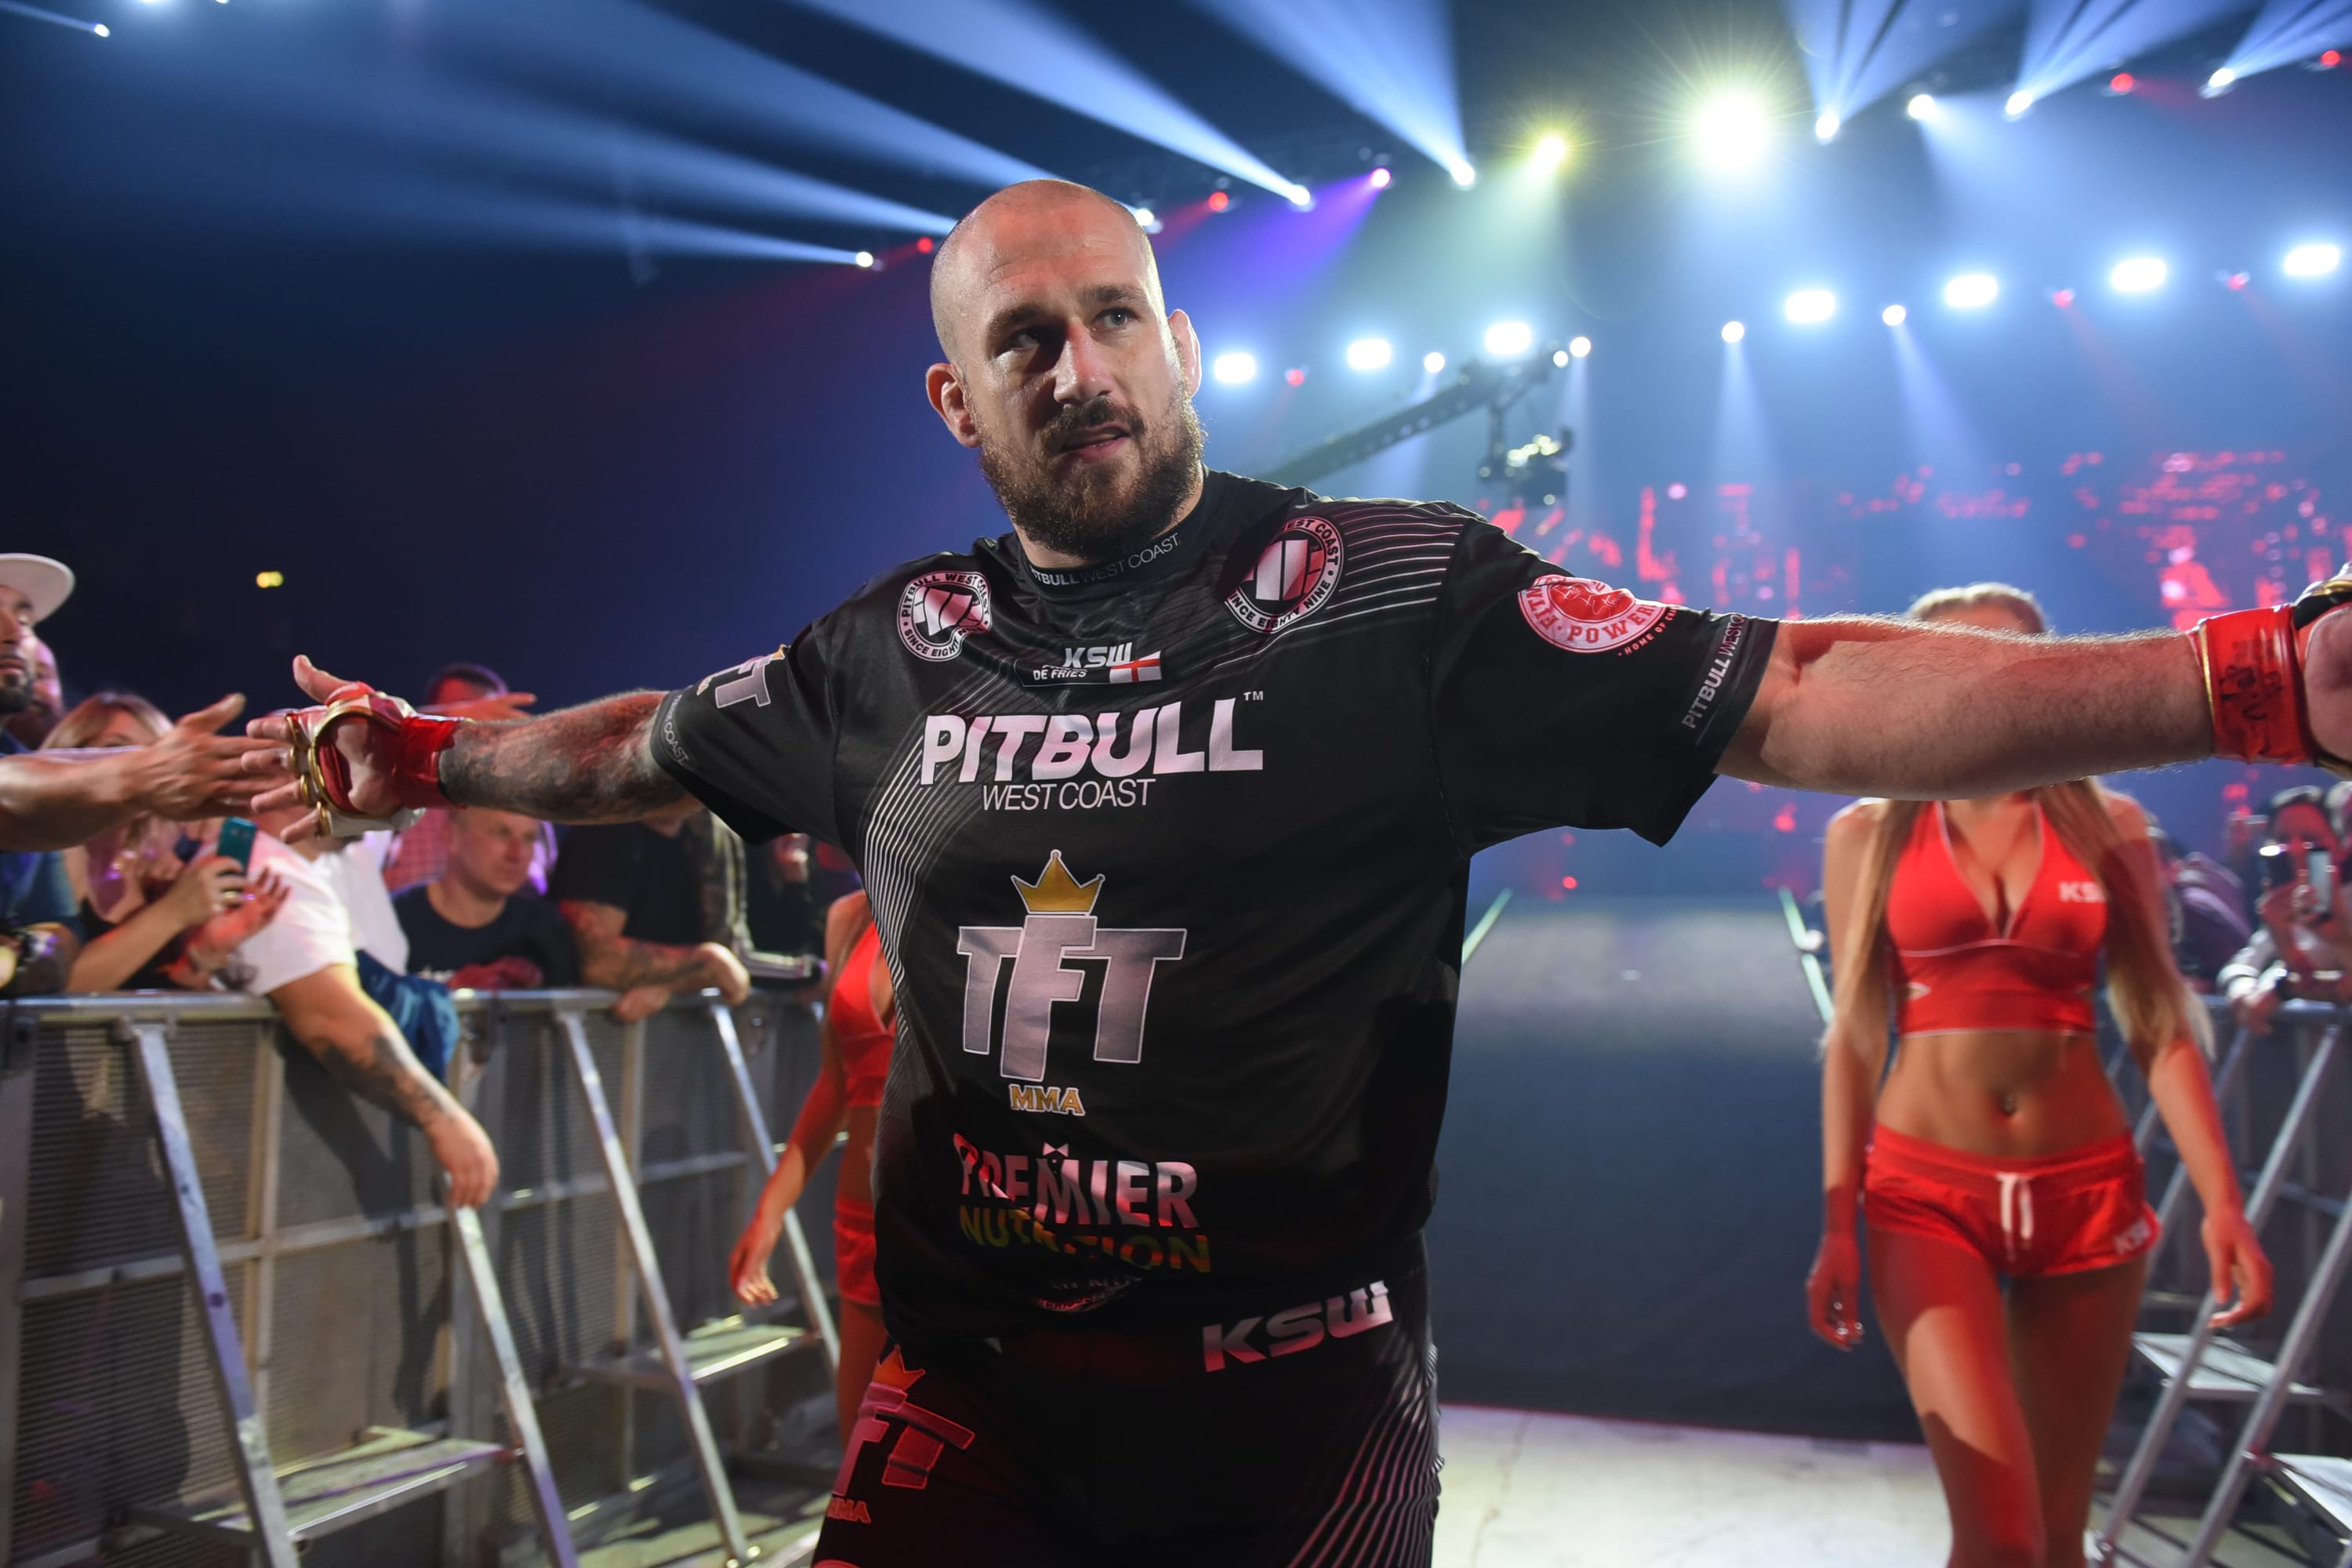 Phil De Fries will defend his KSW heavyweight championship against Luis Henrique at KSW 50 in London's SSE Arena Wembley